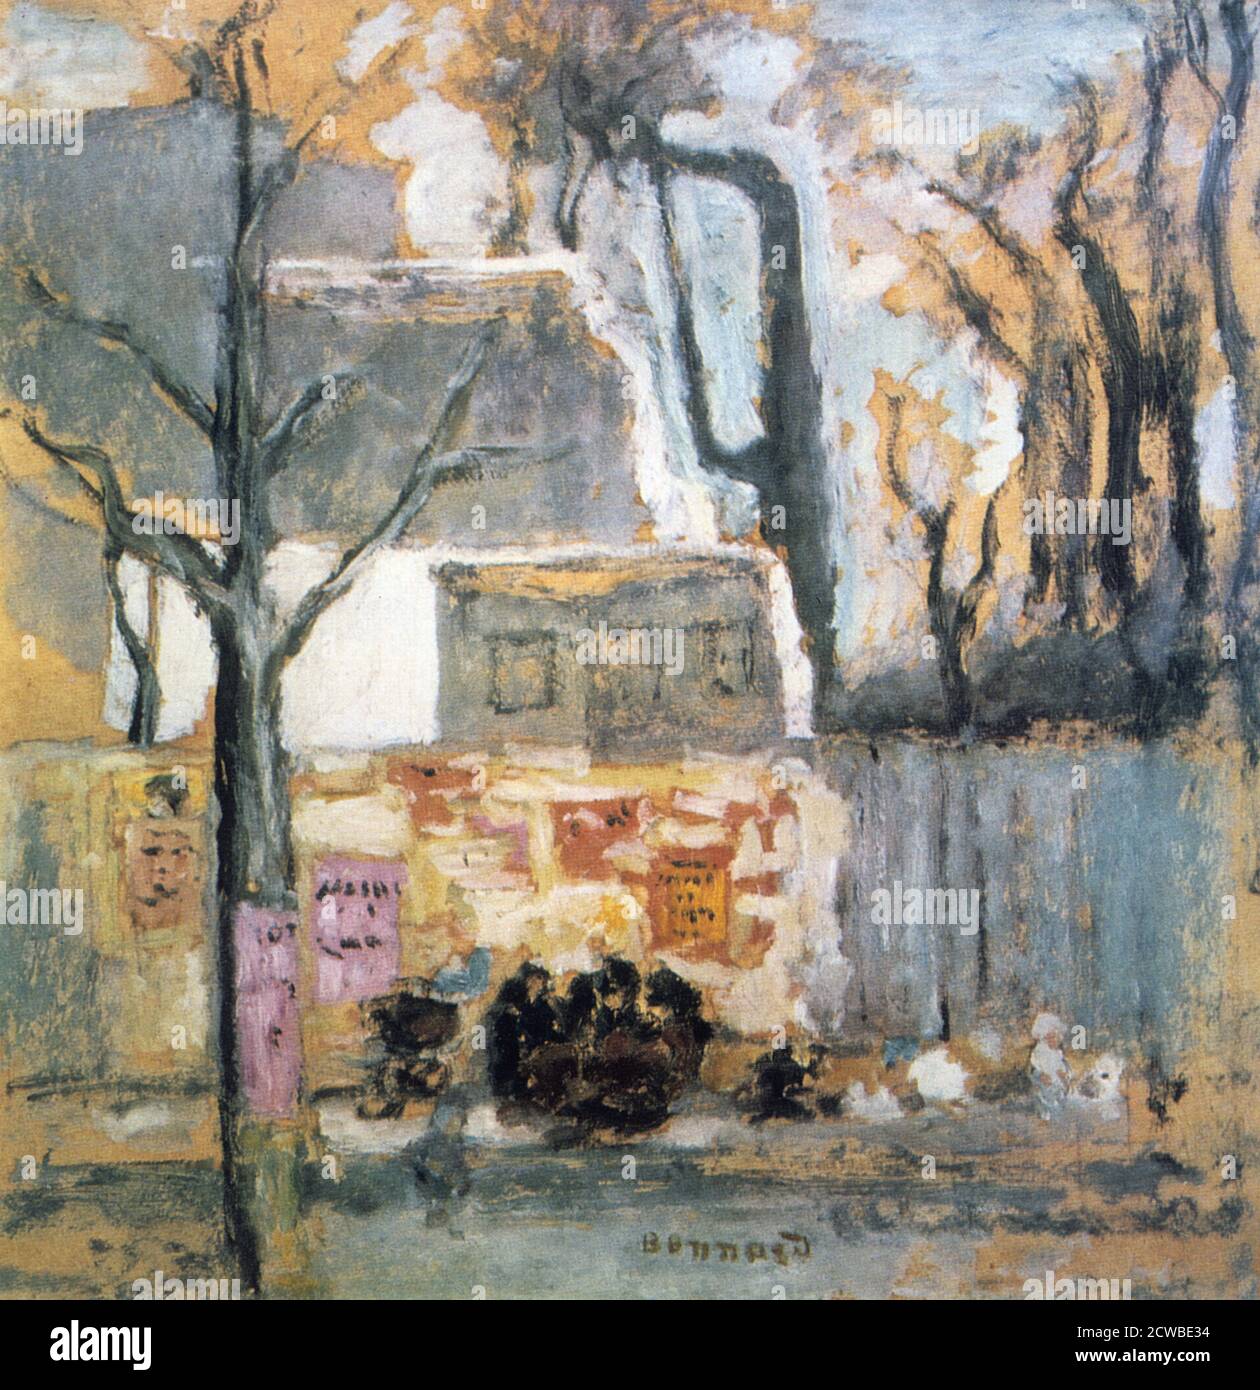 Corner of Paris', c1905. Artist: Pierre Bonnard. Bonnard was a French painter, illustrator, and printmaker, known for the stylized decorative qualities of his paintings and his bold use of colour. He was a founding member of the Post-Impressionist group of avant-garde painters Les Nabis. Stock Photo